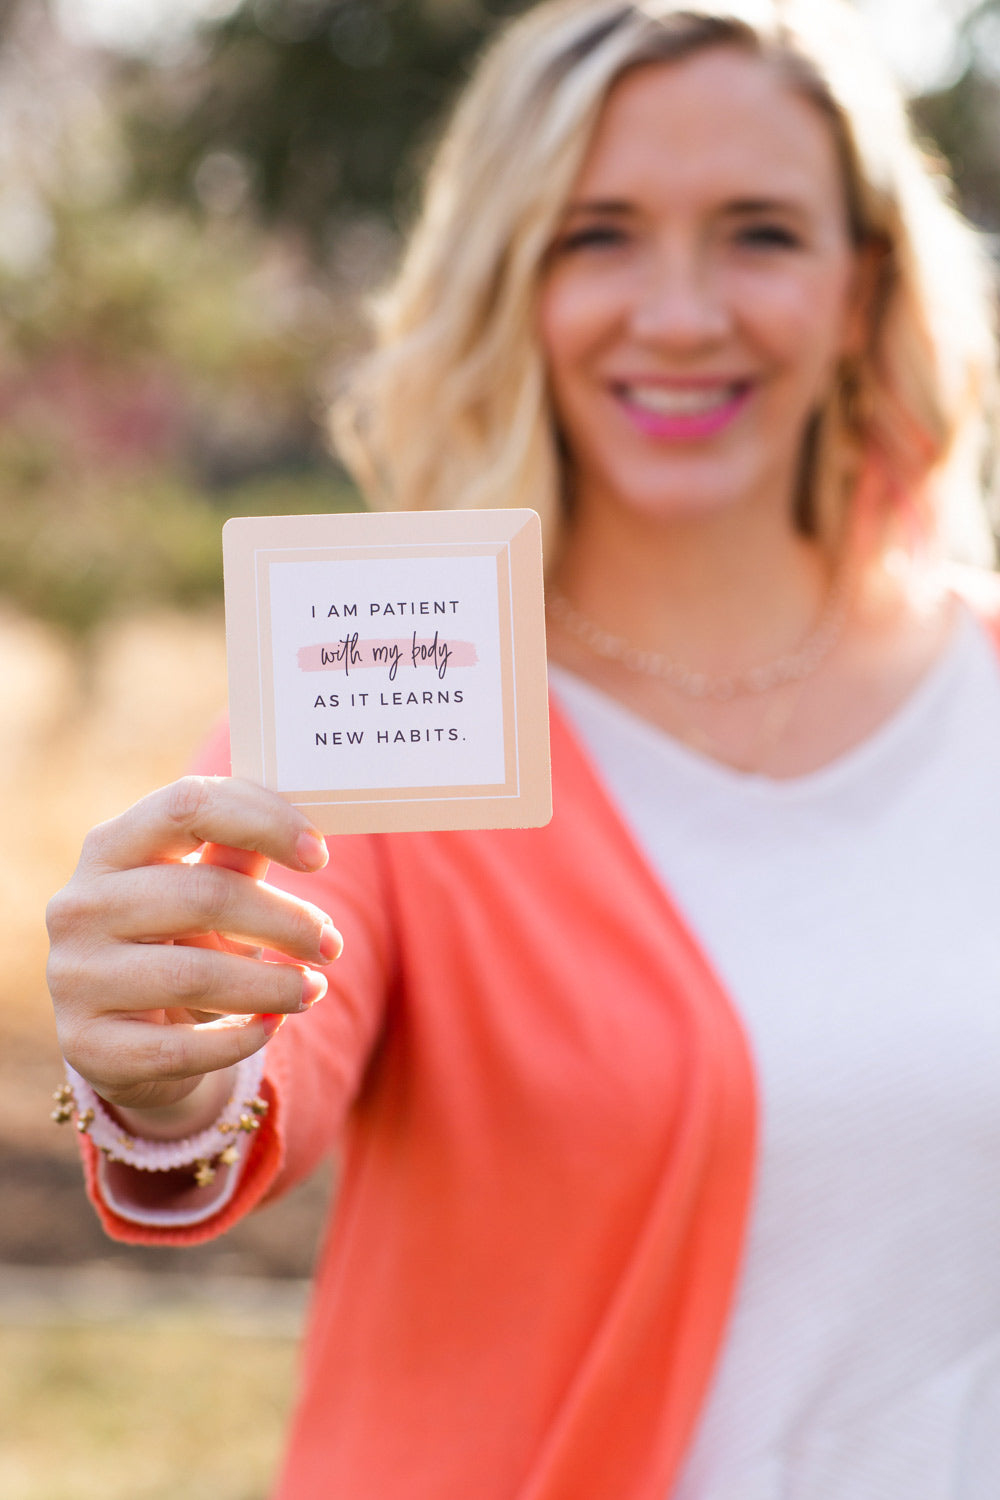 Weight Loss Affirmation Cards